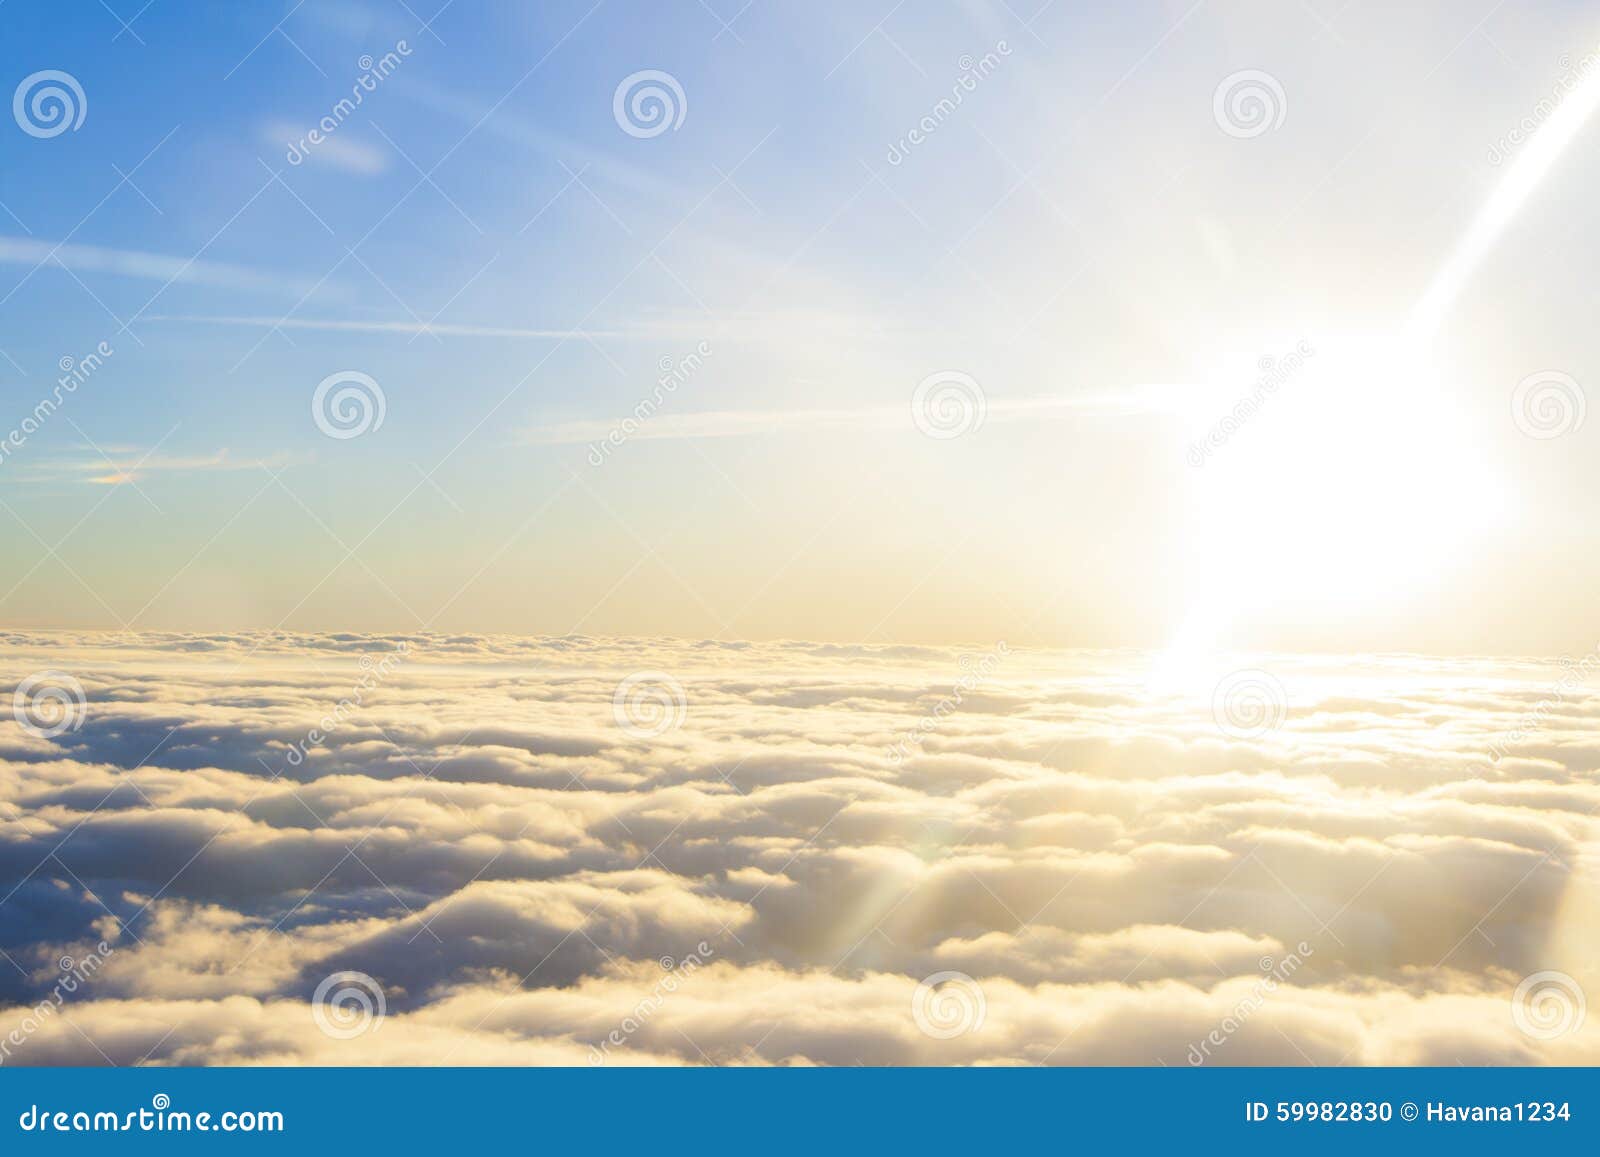 high above the sun and clouds.